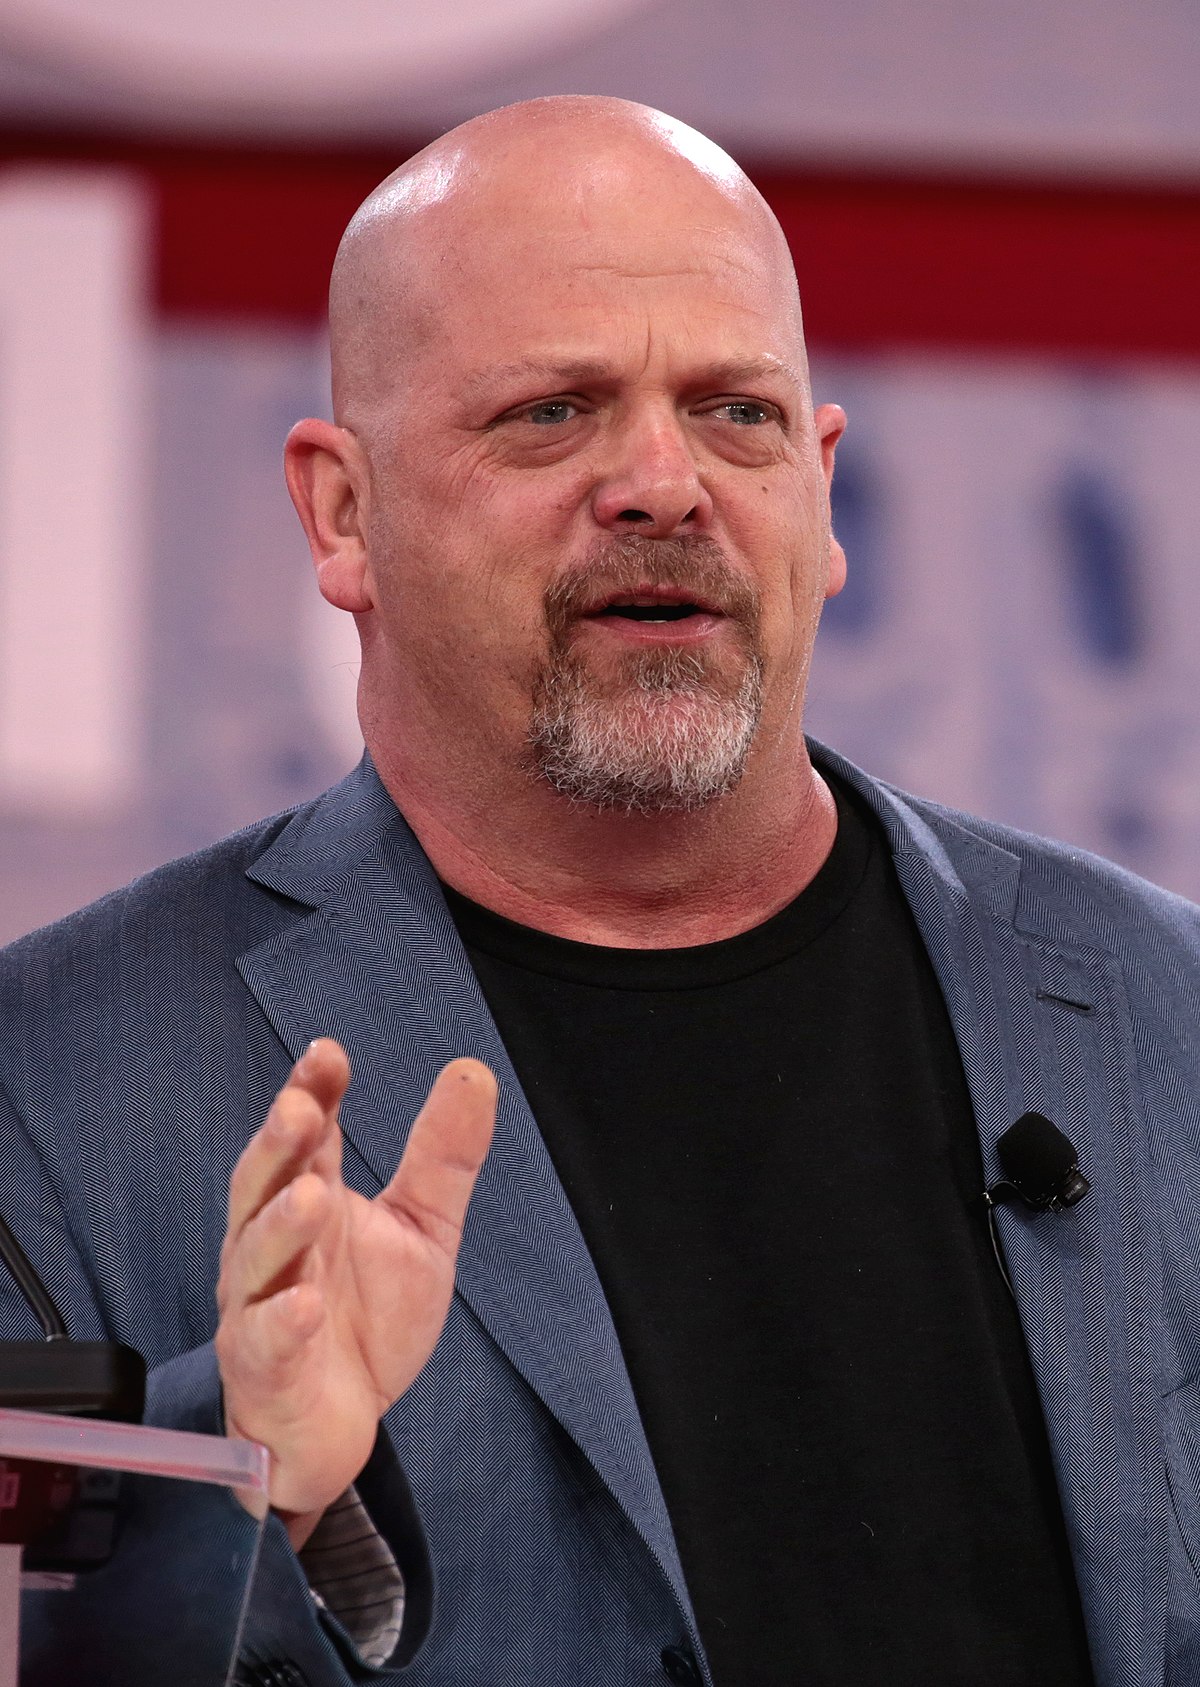 The 56-year old son of father Richard Benjamin Harrison Jr. and mother Joanne Rhue Harrison Rick Harrison in 2022 photo. Rick Harrison earned a  million dollar salary - leaving the net worth at 5 million in 2022